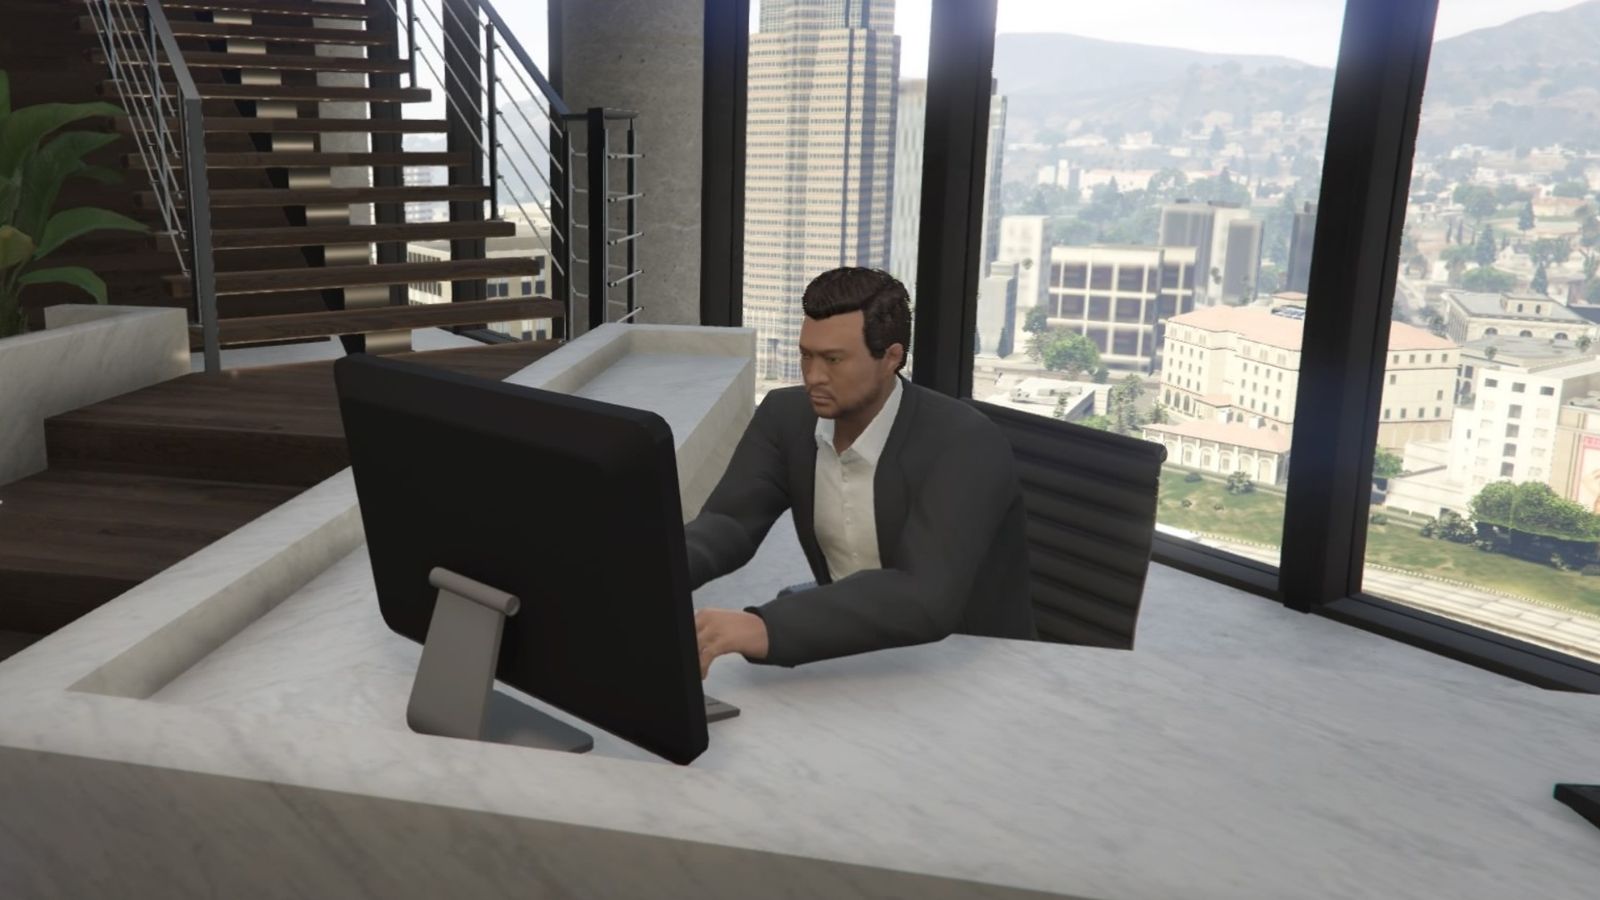 GTA Online The Contract DLC Agency Reception. The reception worker/bodyguard is sitting behind a white marble desk and is on his computer.